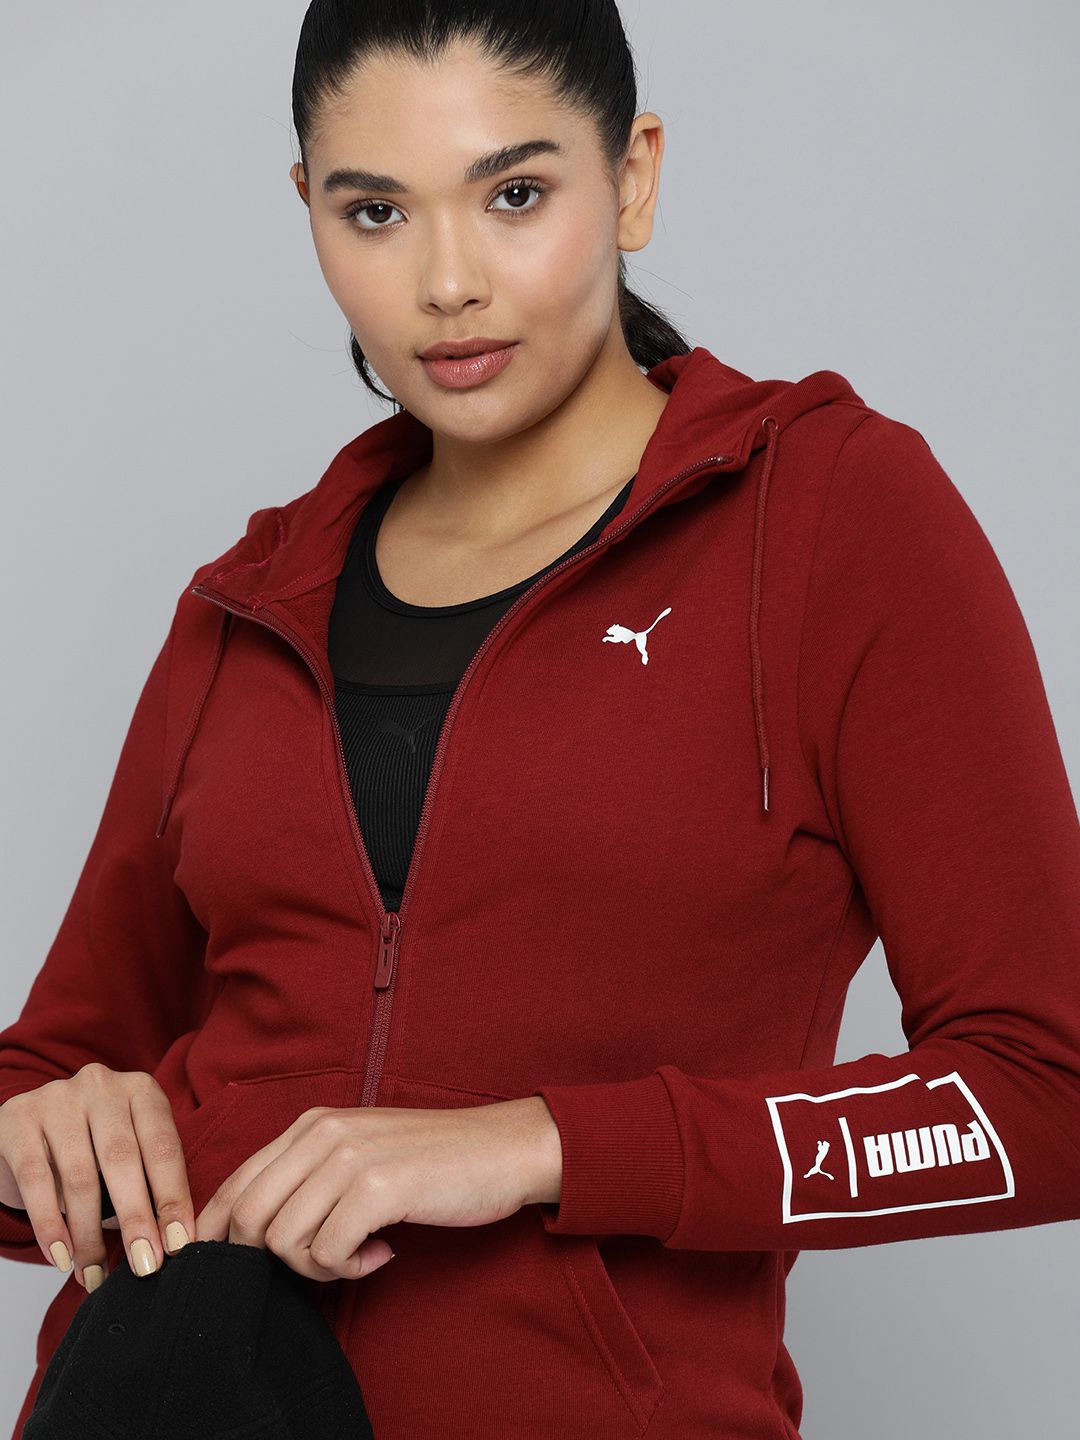 Puma Women Intense Red Solid Hooded Dry CELL Technology Regular Sporty Jacket Price in India